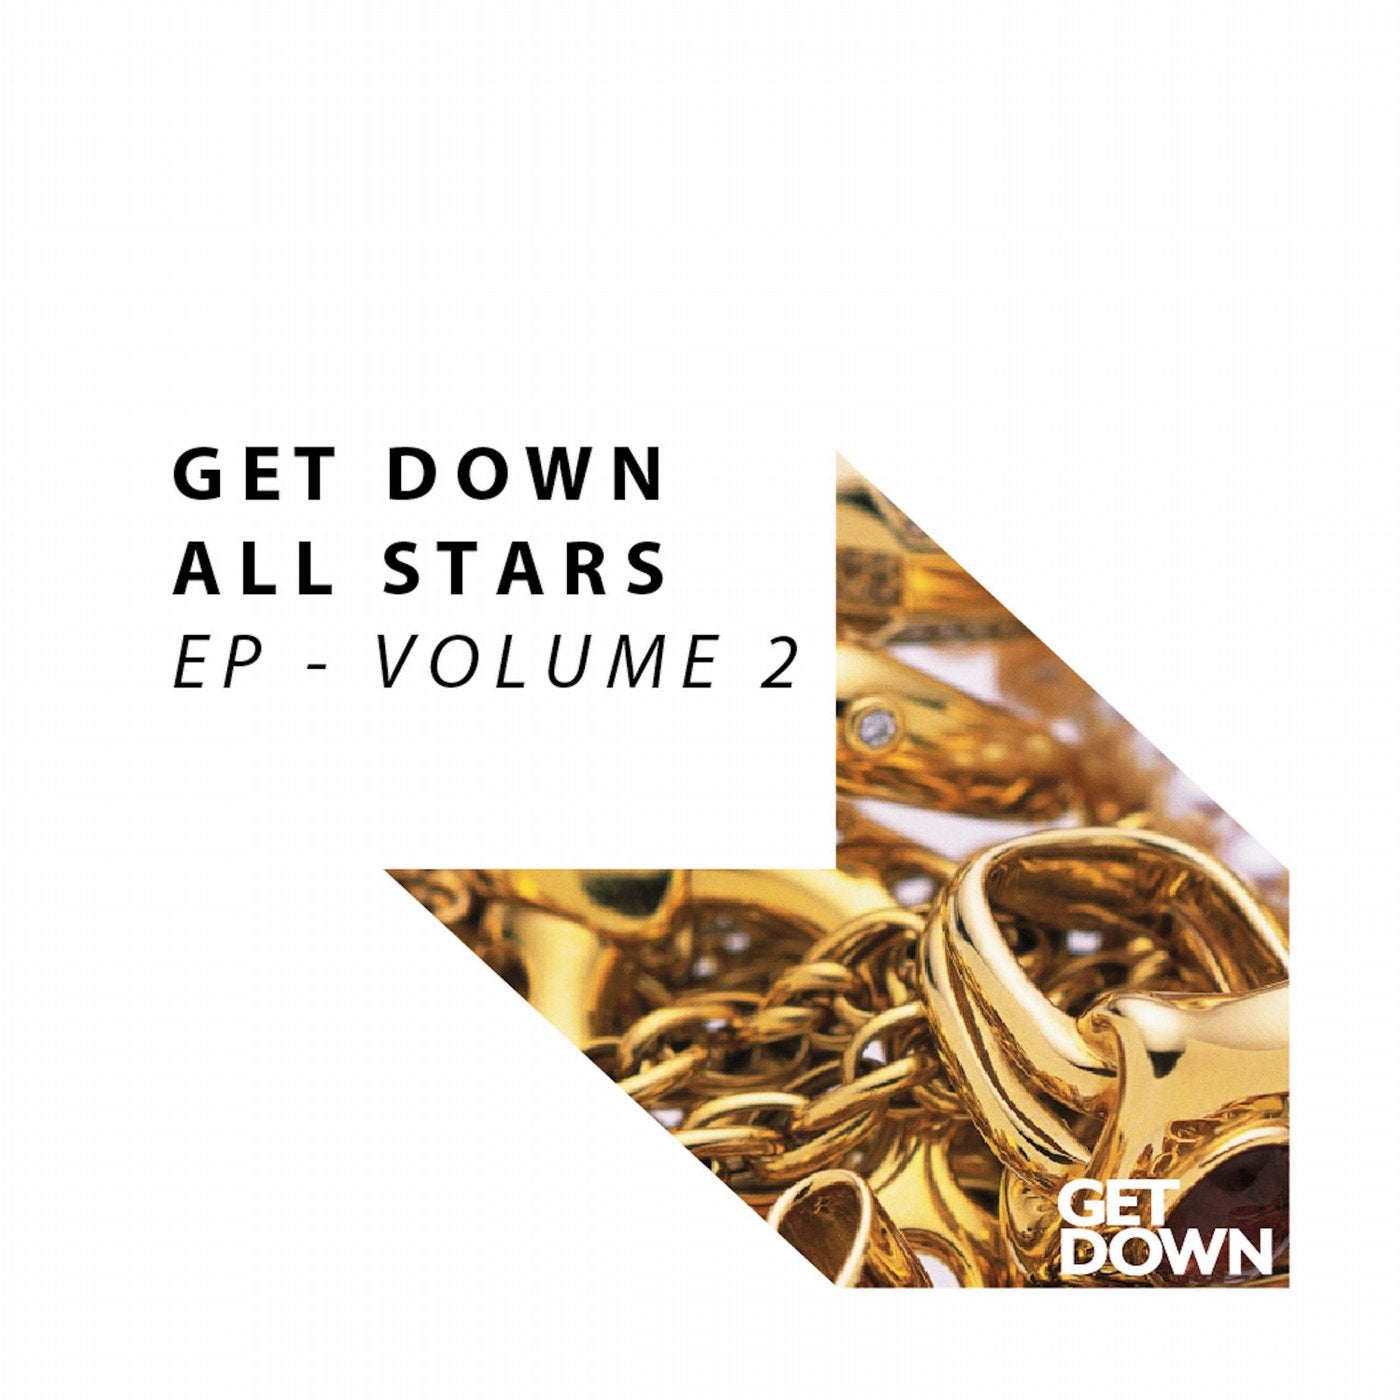 Get Down All Stars EP - Volume 2